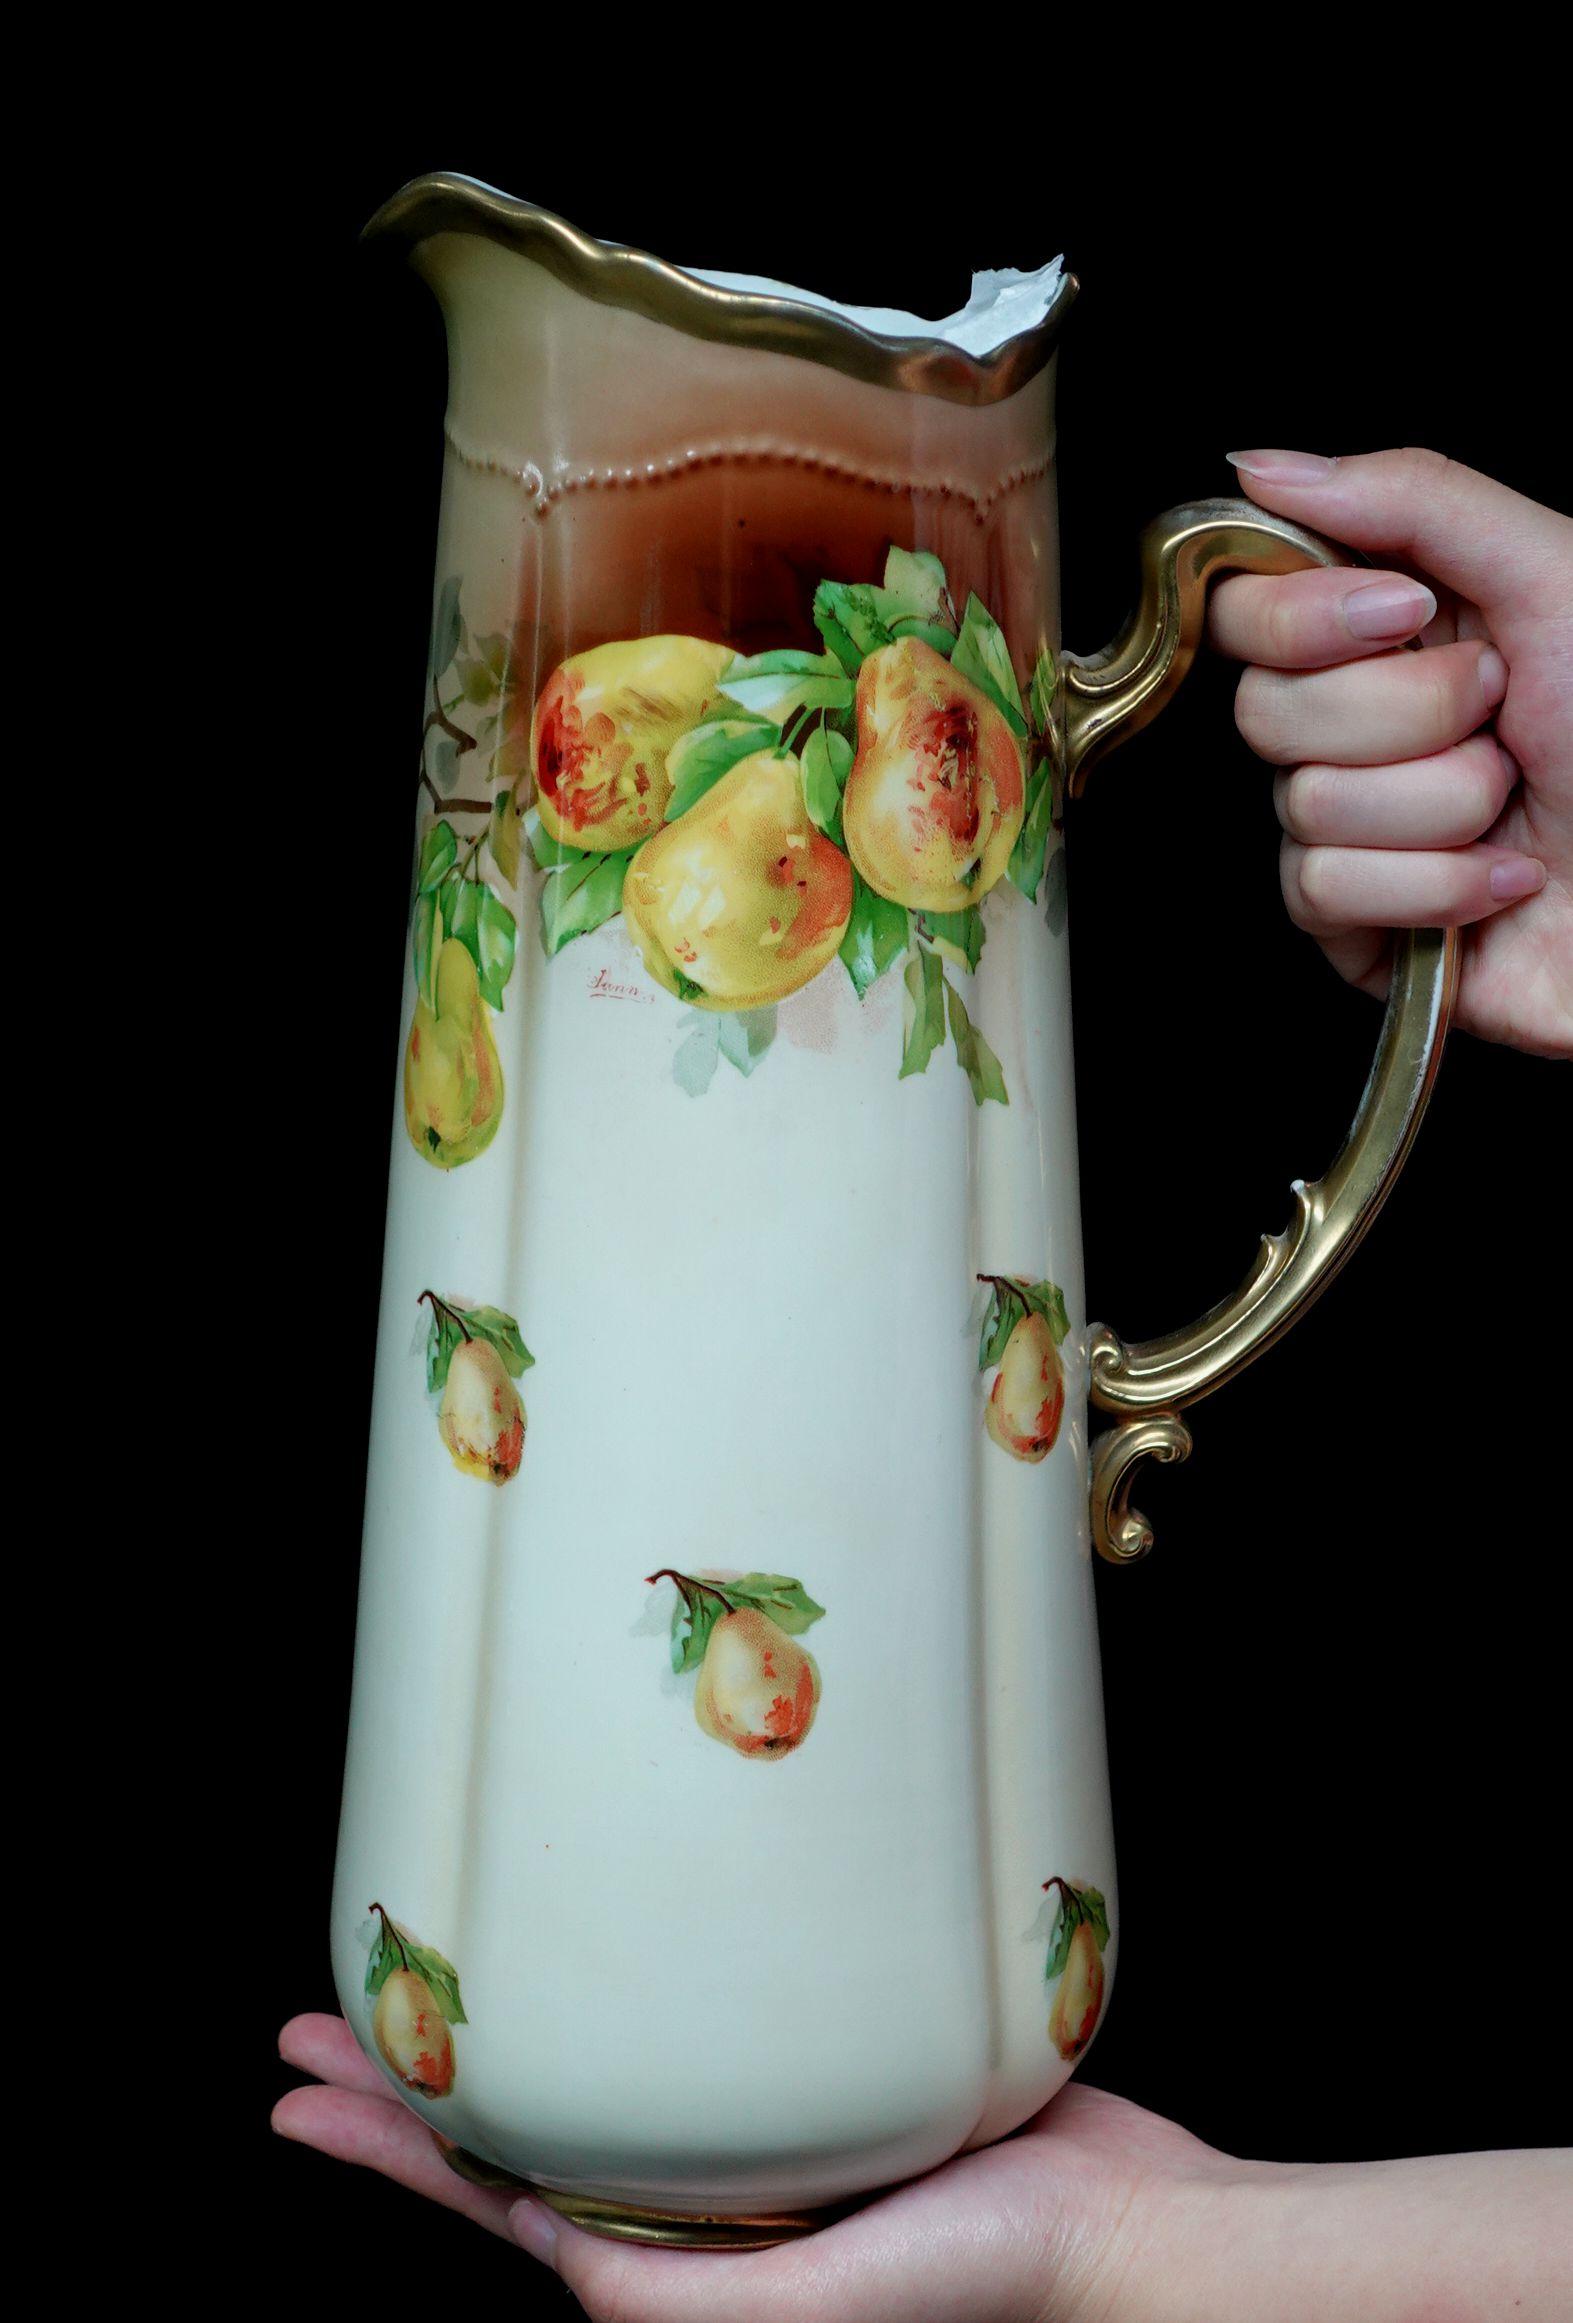 A wonderful antique Royal Austria Large Tankard absolutely 100% hand-painted fruits, pears in yellow and orange presentation, and rich green leaves, delicate arrangement of the composition, some single pear painted randomly on the tankard throughout